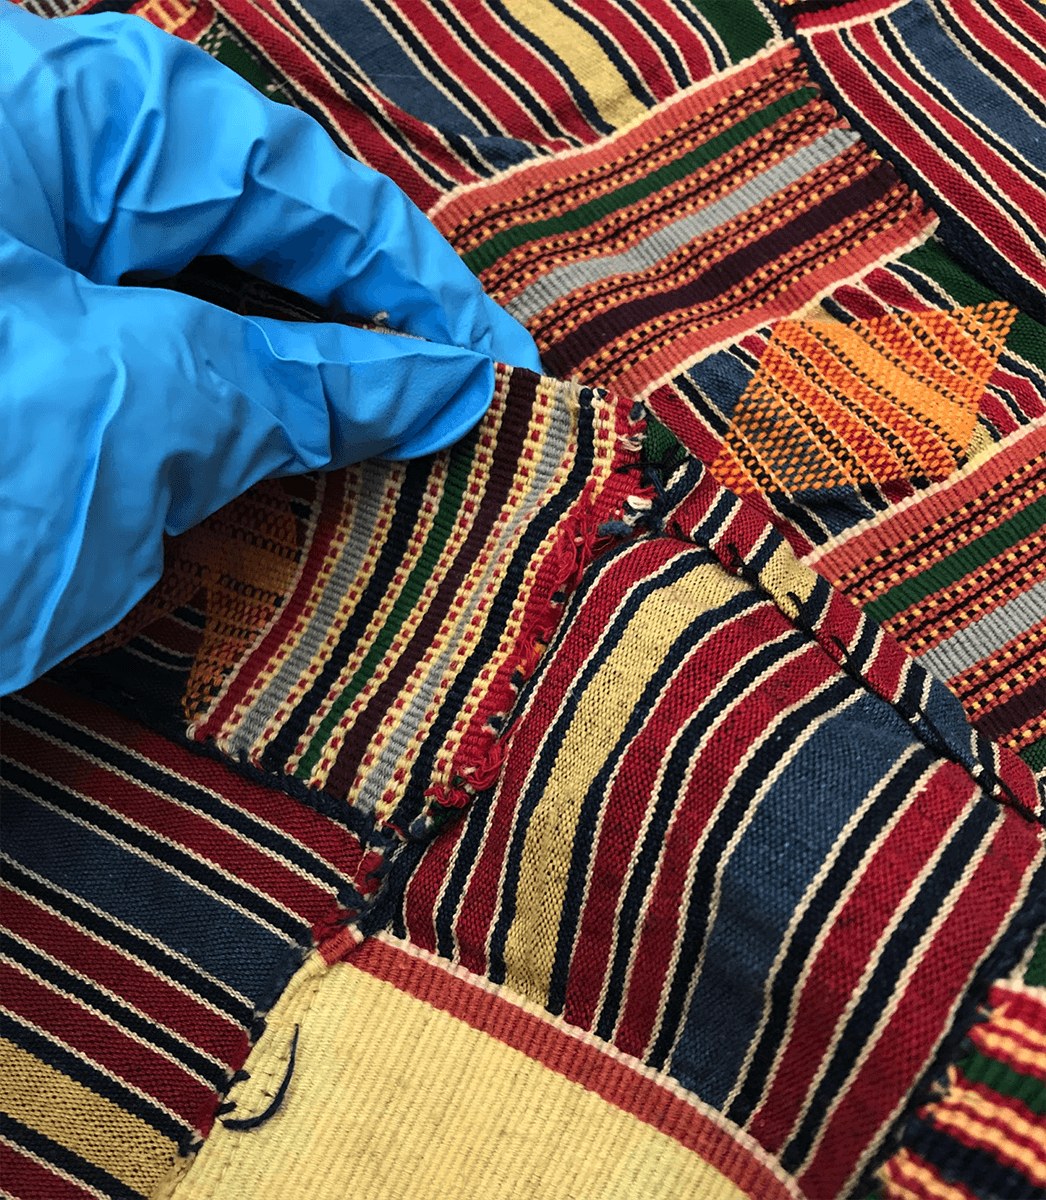 gloved hand examining patterned African textile